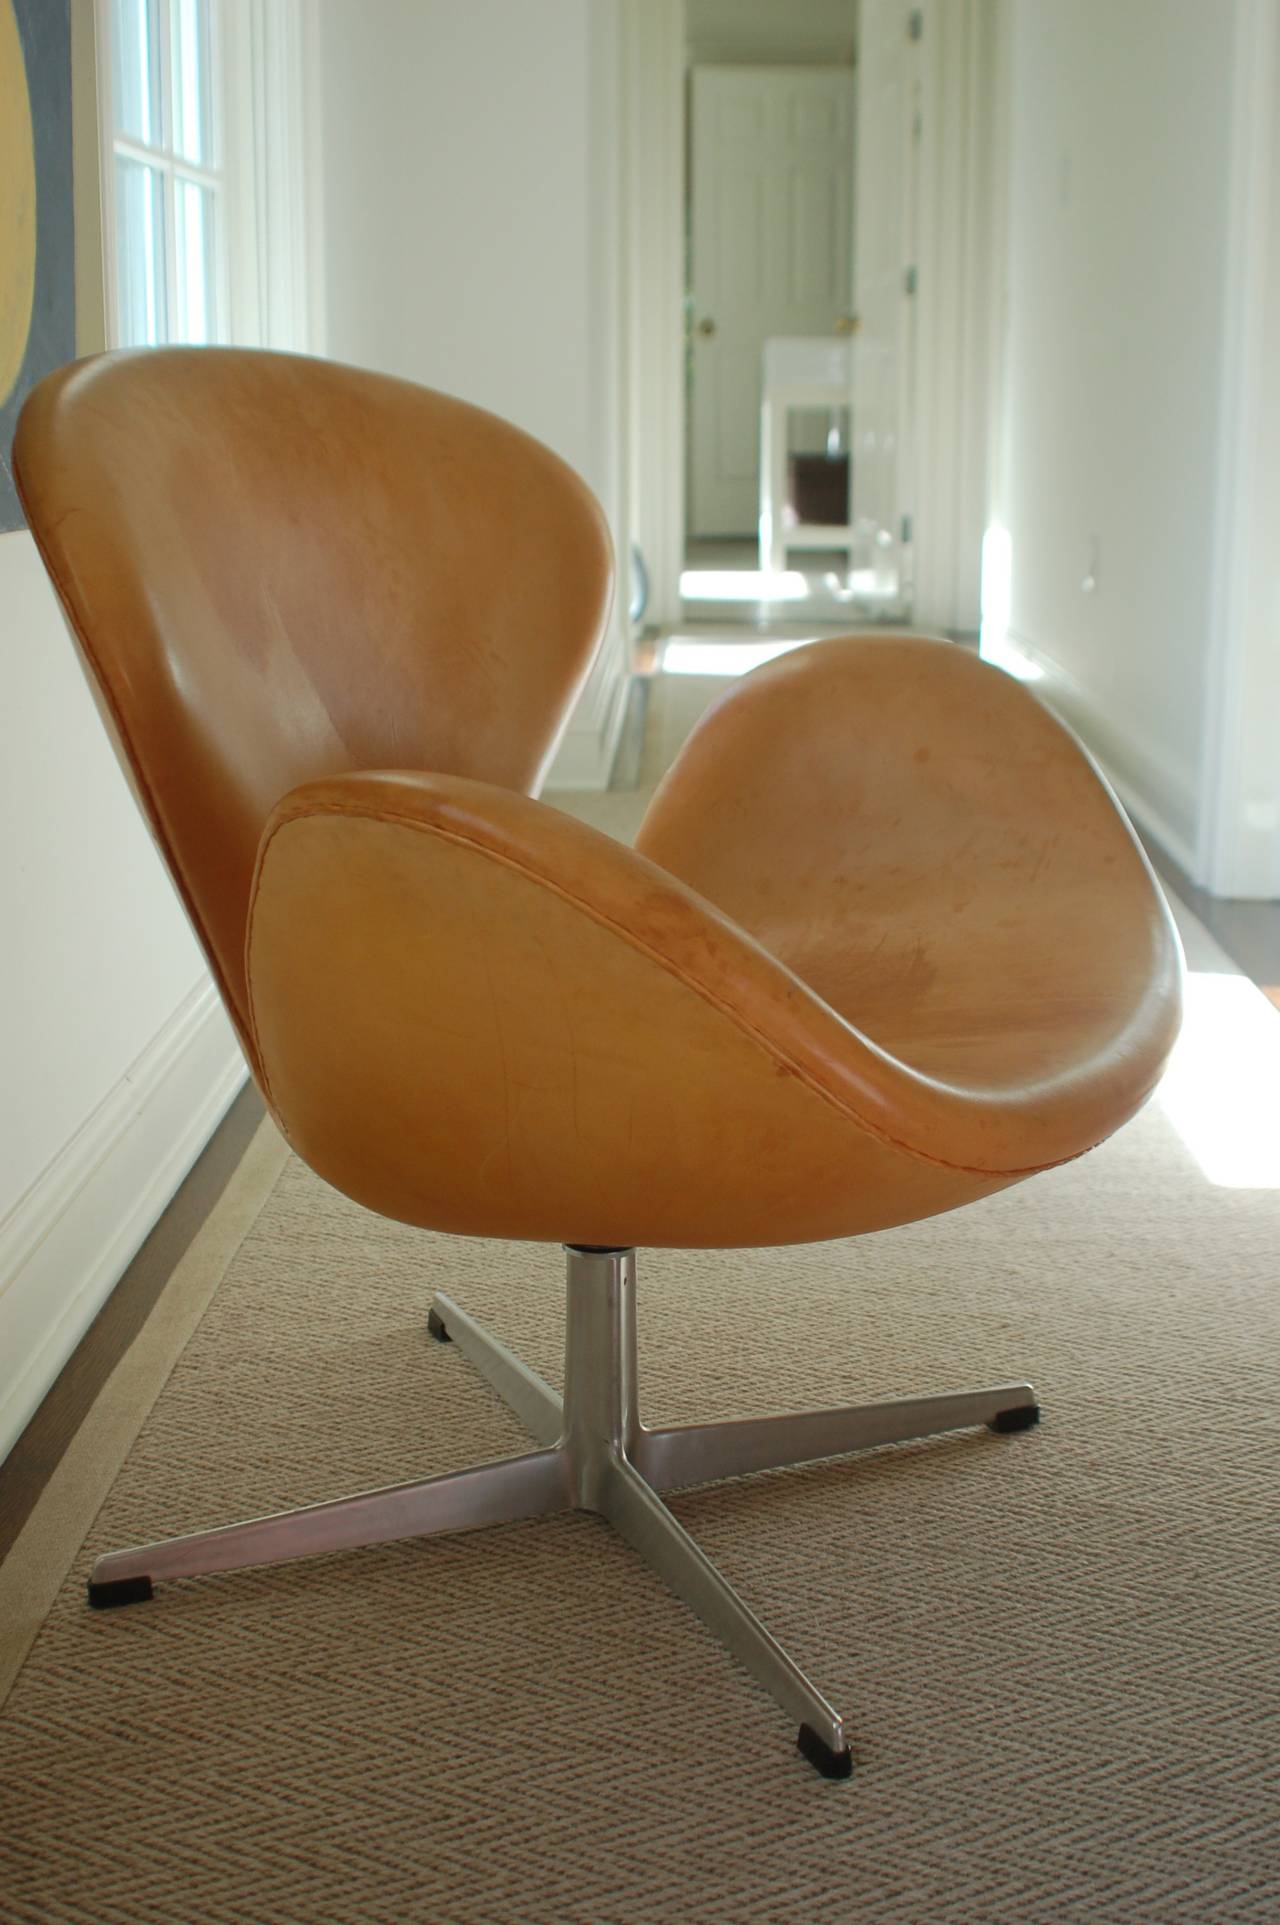 Mid-20th Century Rare Natural Leather Early Swan Chairs by Arne Jacobsen, circa 1963 For Sale